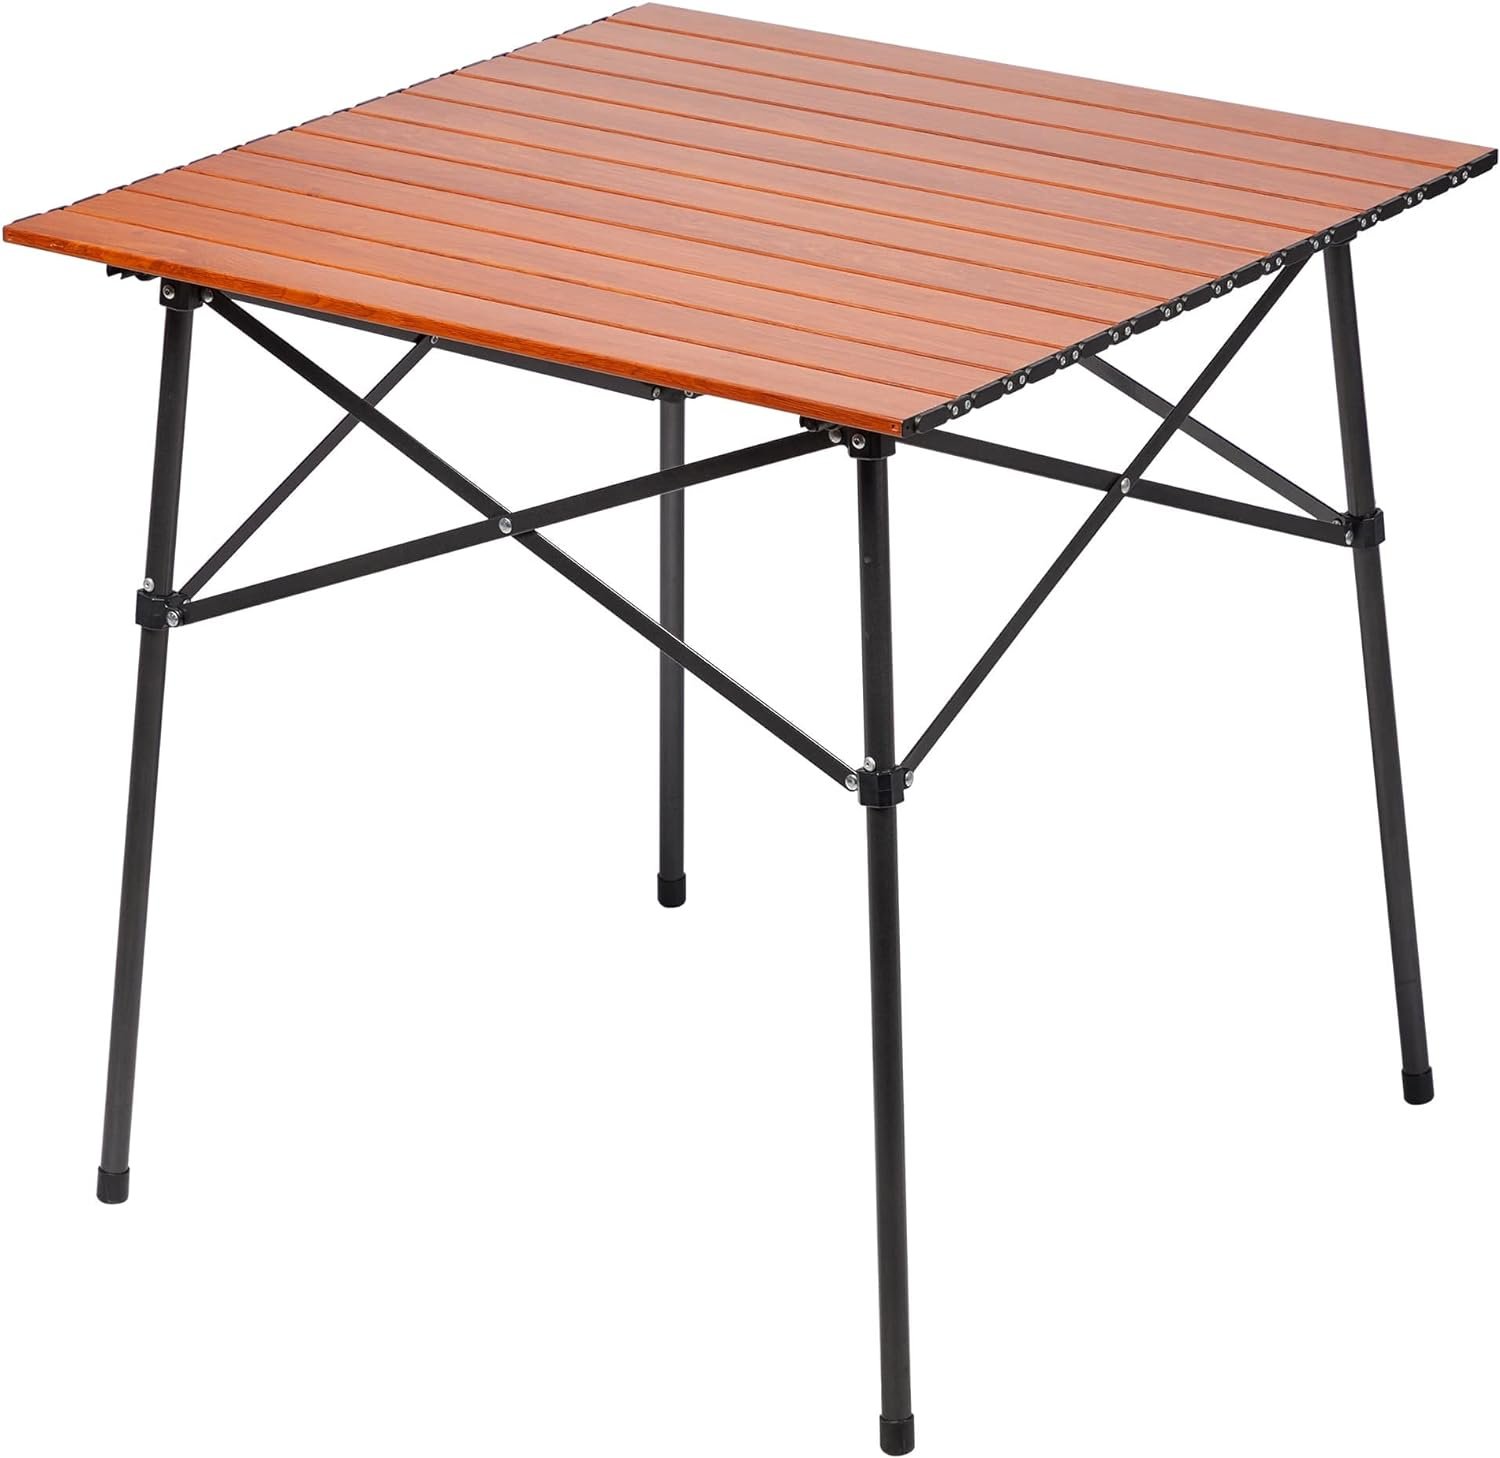 PORTAL Lightweight Aluminum Folding Square Table Roll Up Top 4 People Compact Table with Carry Bag for Camping, Picnic, Backyards, BBQ